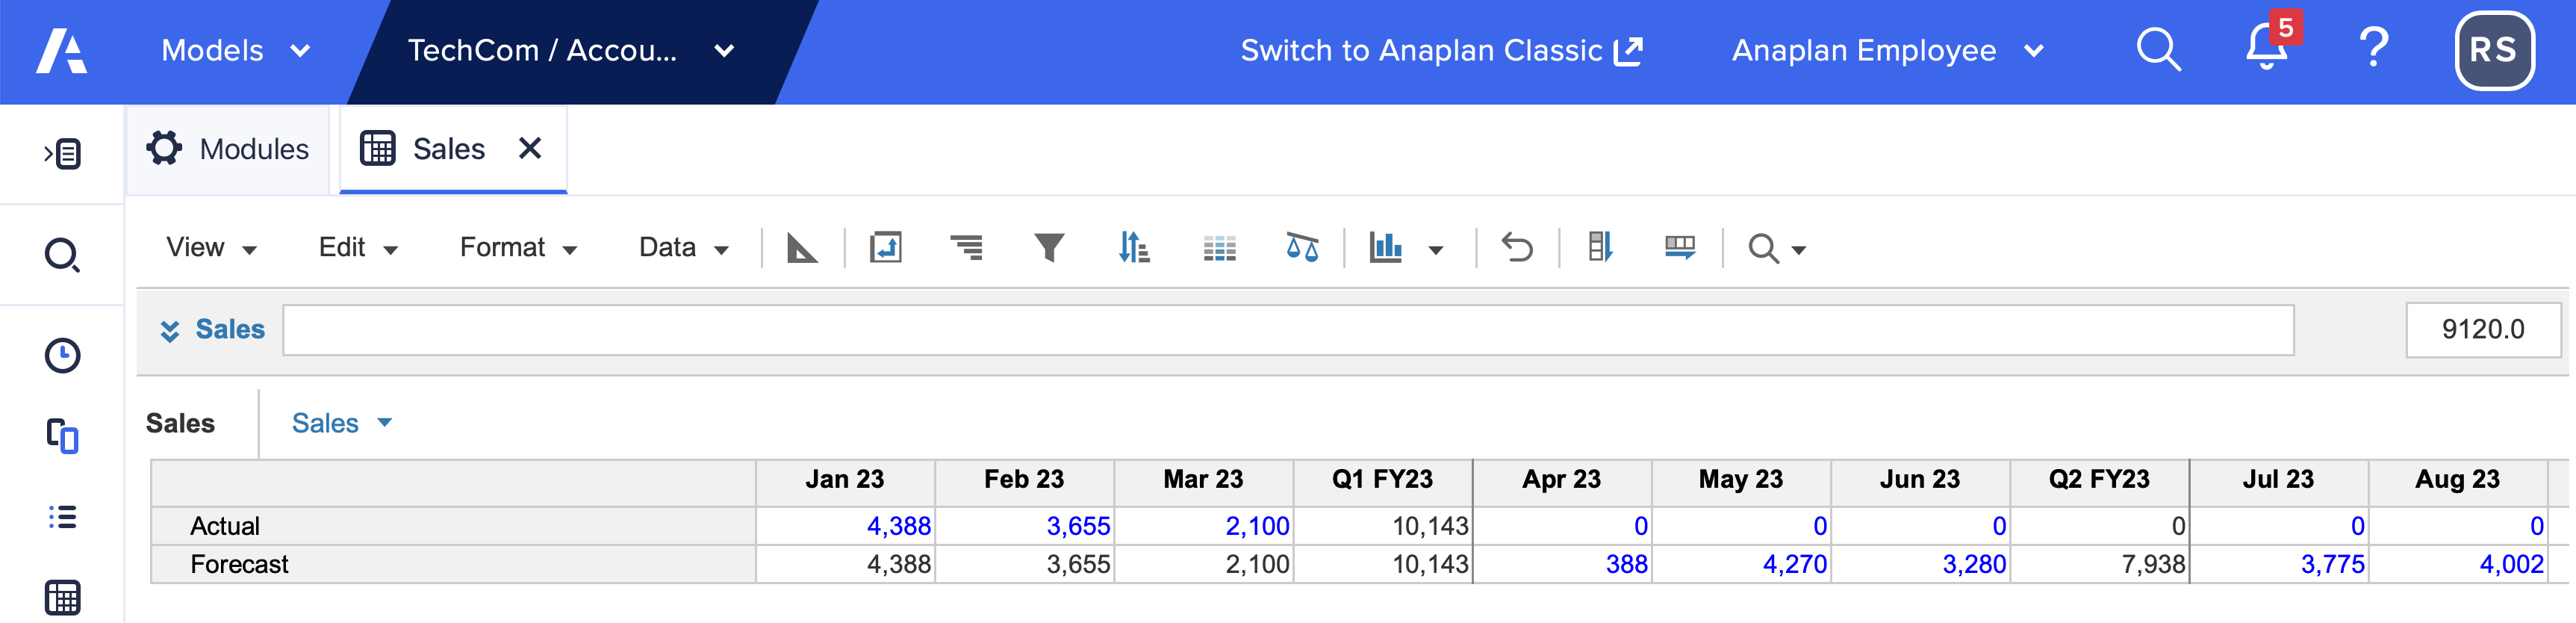 A module with Versions on rows, Time on columns, and a line item called Sales on pages. For Jan 23, Feb 23, Mar 23, data for the Actual version is blue and editable, but data for the Forecast version is black and not editable. The data for both versions is the same for these time periods. From Apr 23 onwards, cell data for both Actual and Forecast is blue. Data has been entered for the Forecast, but Actual data is 0 as no actual data has been entered yet.